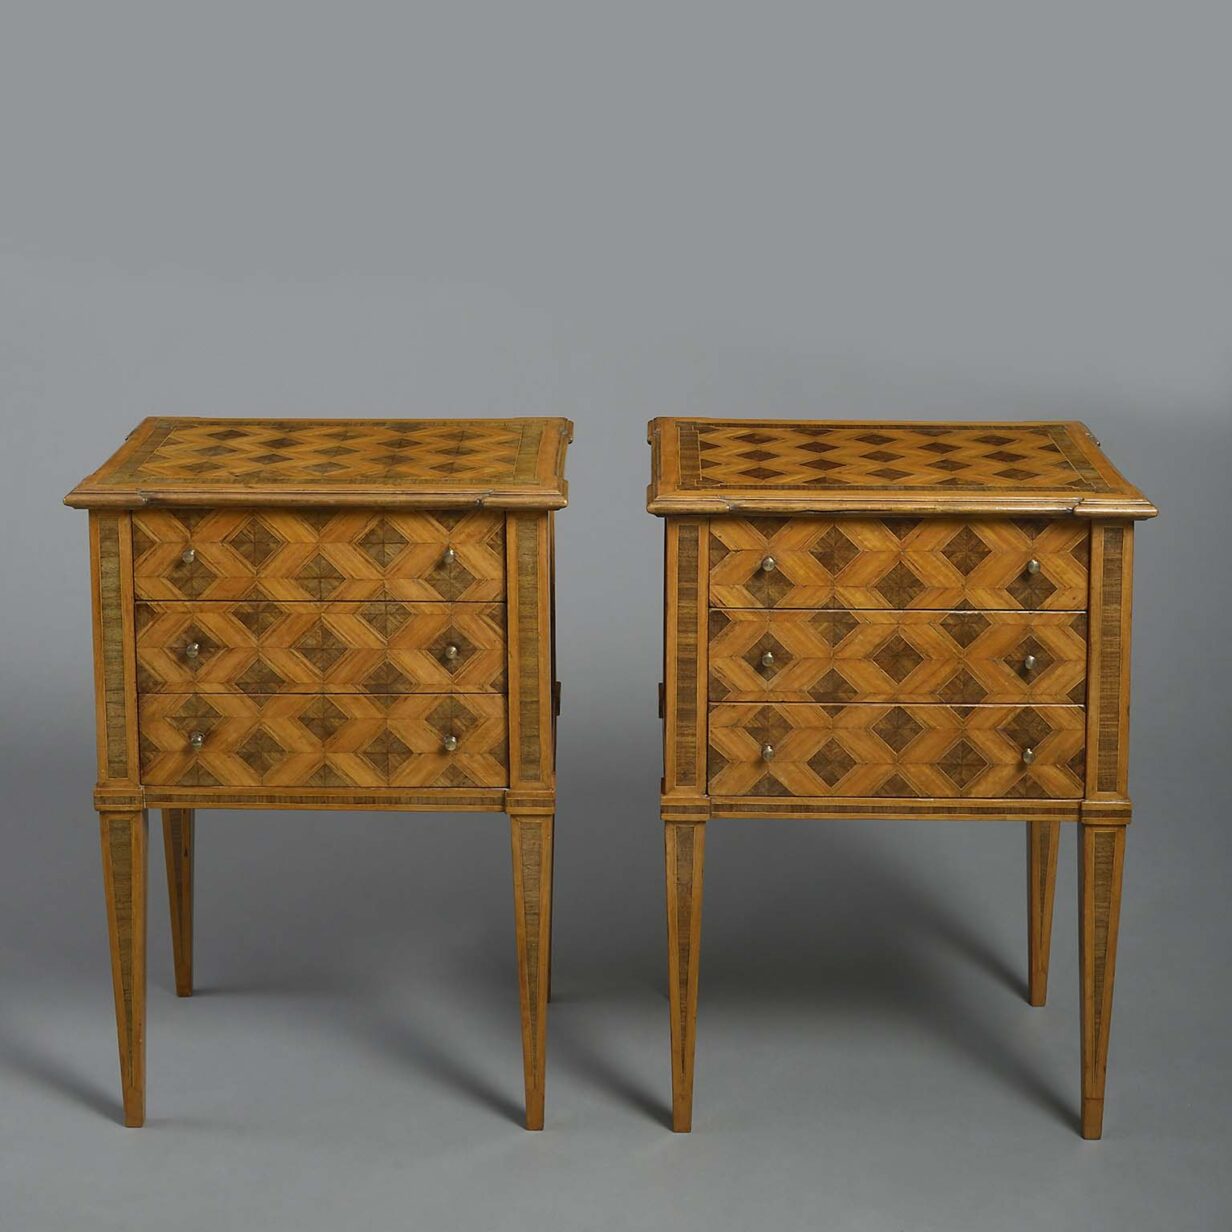 Pair of parquetry bedside cabinets